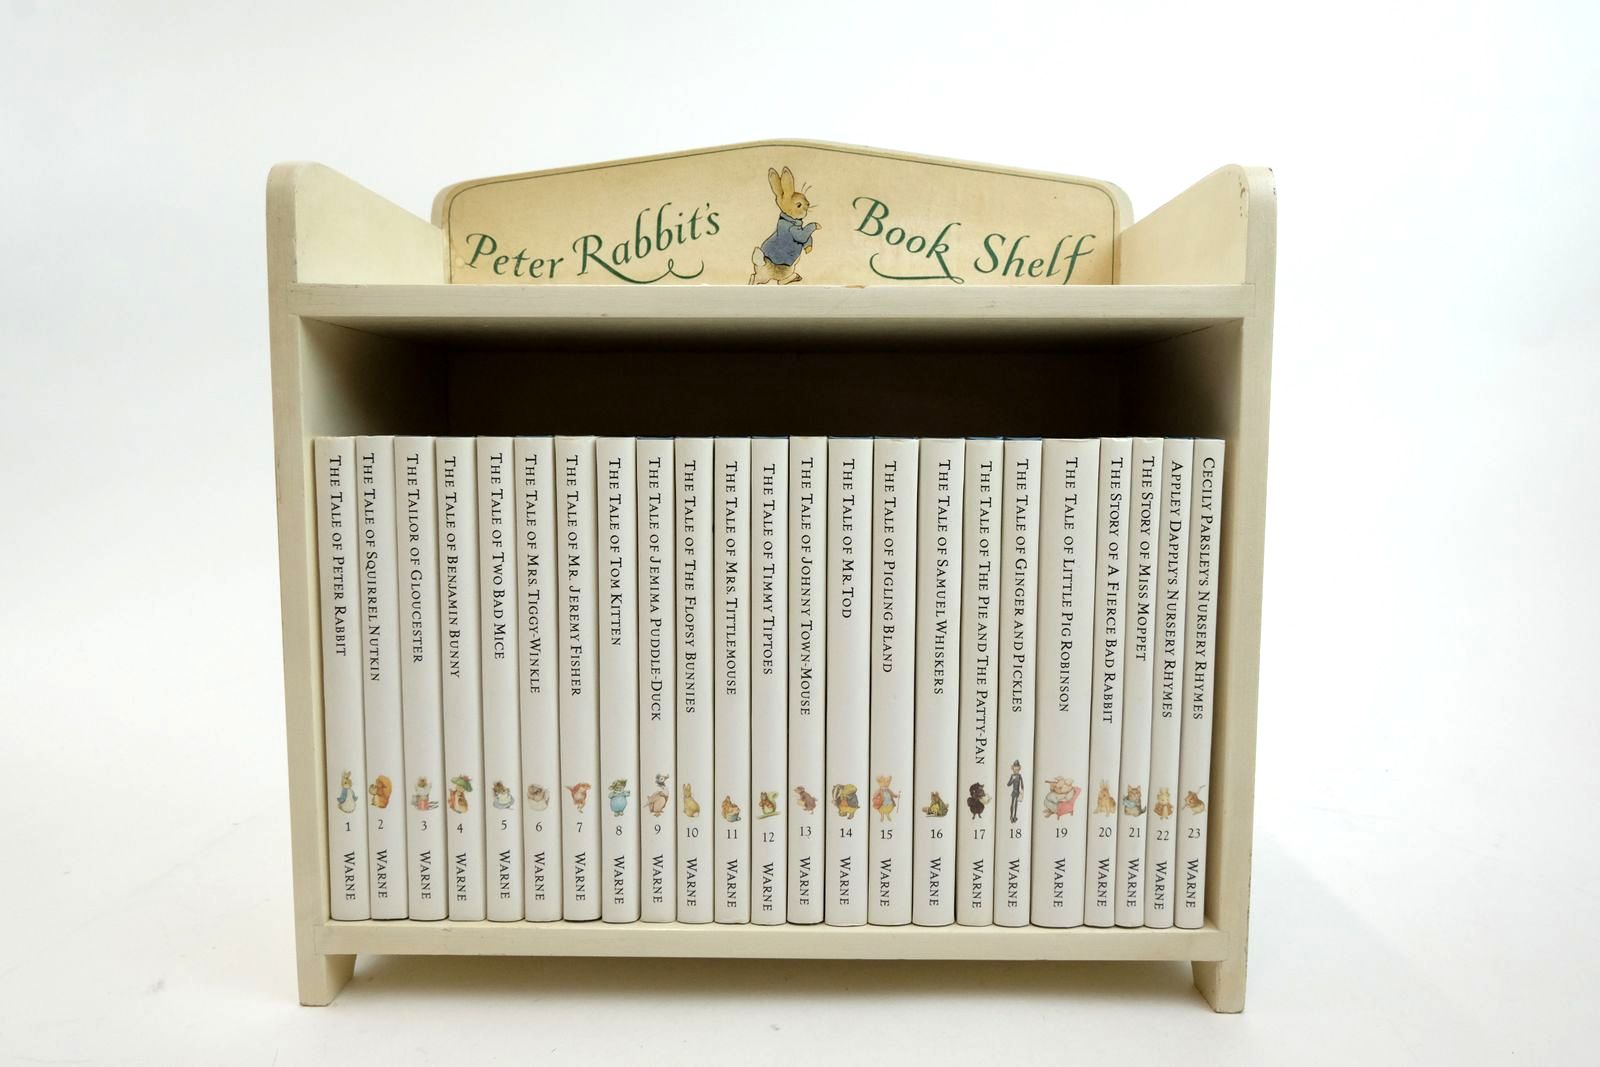 Photo of PETER RABBIT'S BOOK SHELF (COMPLETE SET OF THE TALES WITH BOOKSHELF) written by Potter, Beatrix illustrated by Potter, Beatrix published by The Penguin Group, Frederick Warne (STOCK CODE: 2137062)  for sale by Stella & Rose's Books